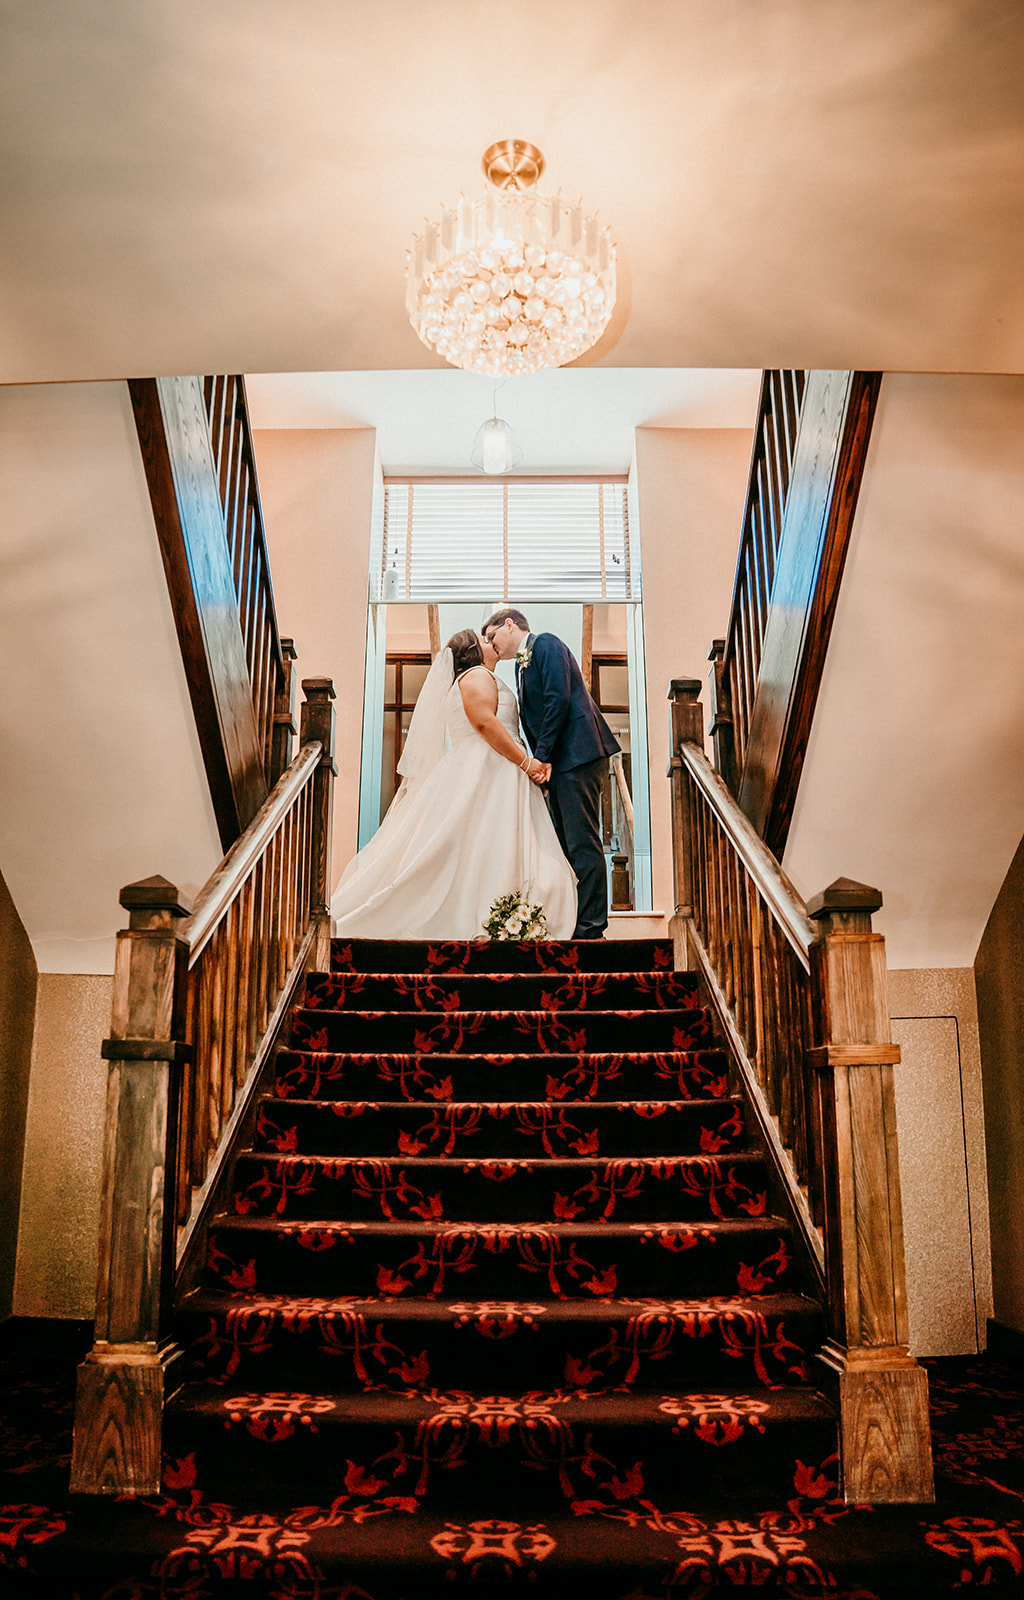 Elle and Andrew at the staircase in the redcastle hotel for their wedding